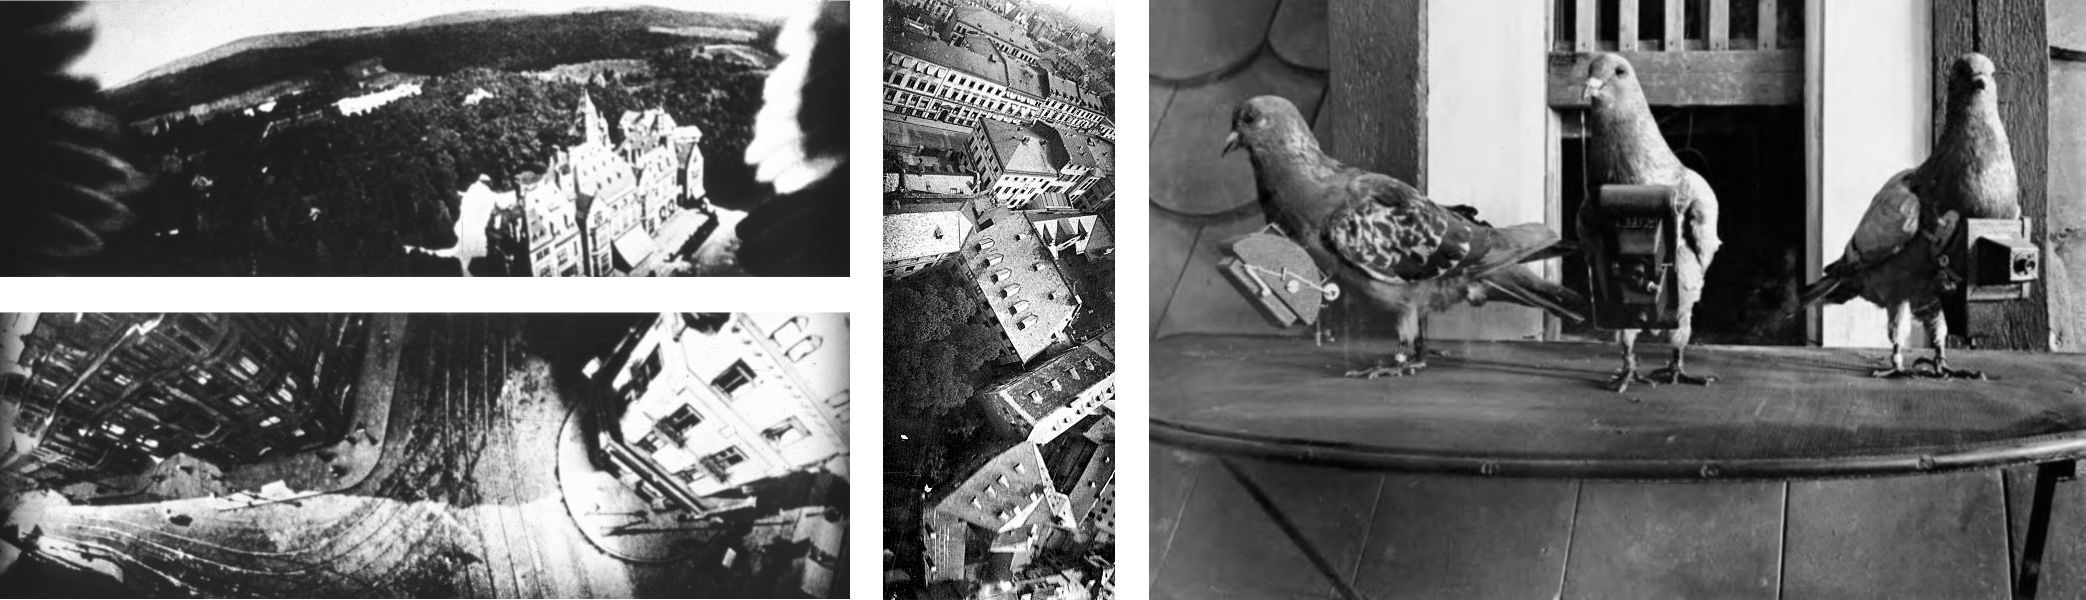 Image:Pigeon photographers and aerial photographs.jpg